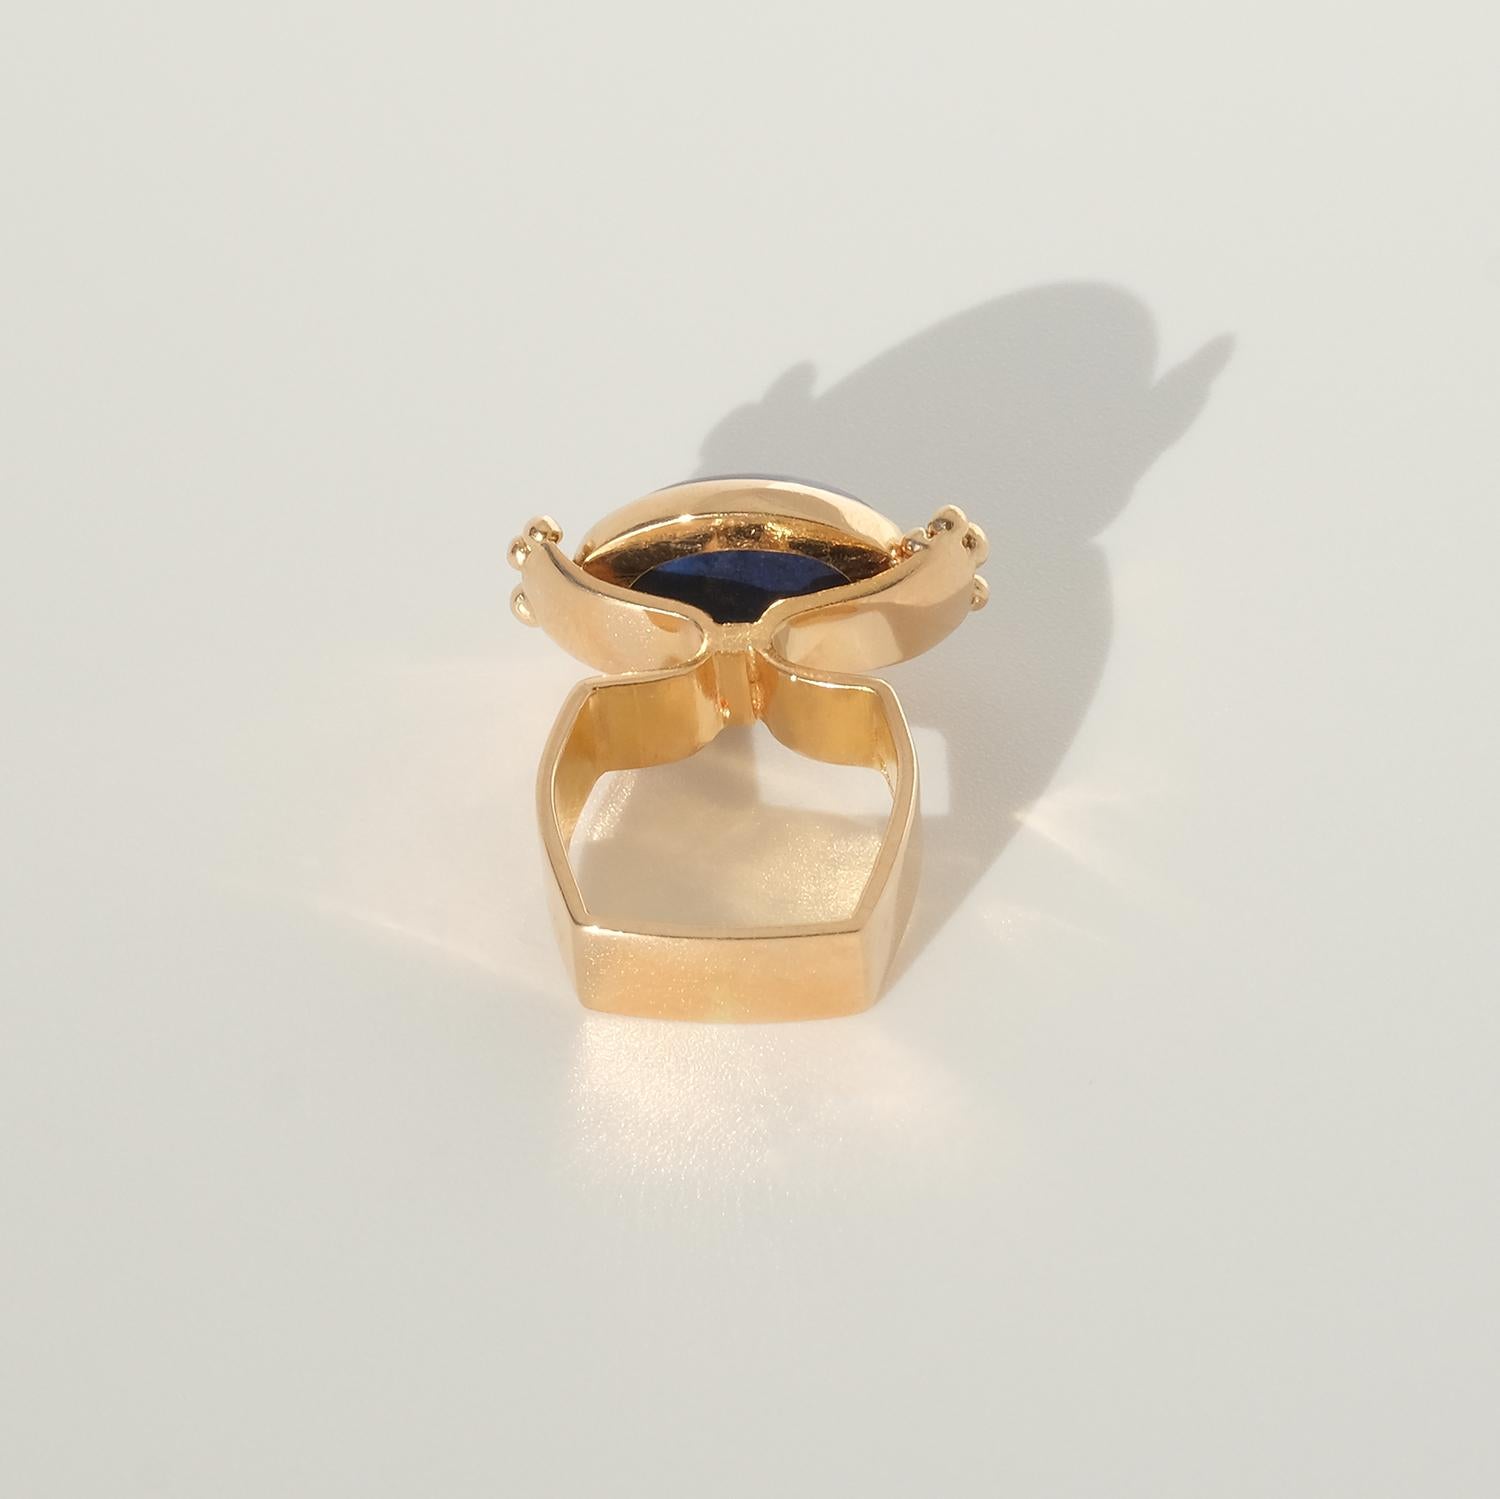 18 K Gold Ring with a Cabochon Cut Lapis Lazuli Stone, Made in 1972 For Sale 1